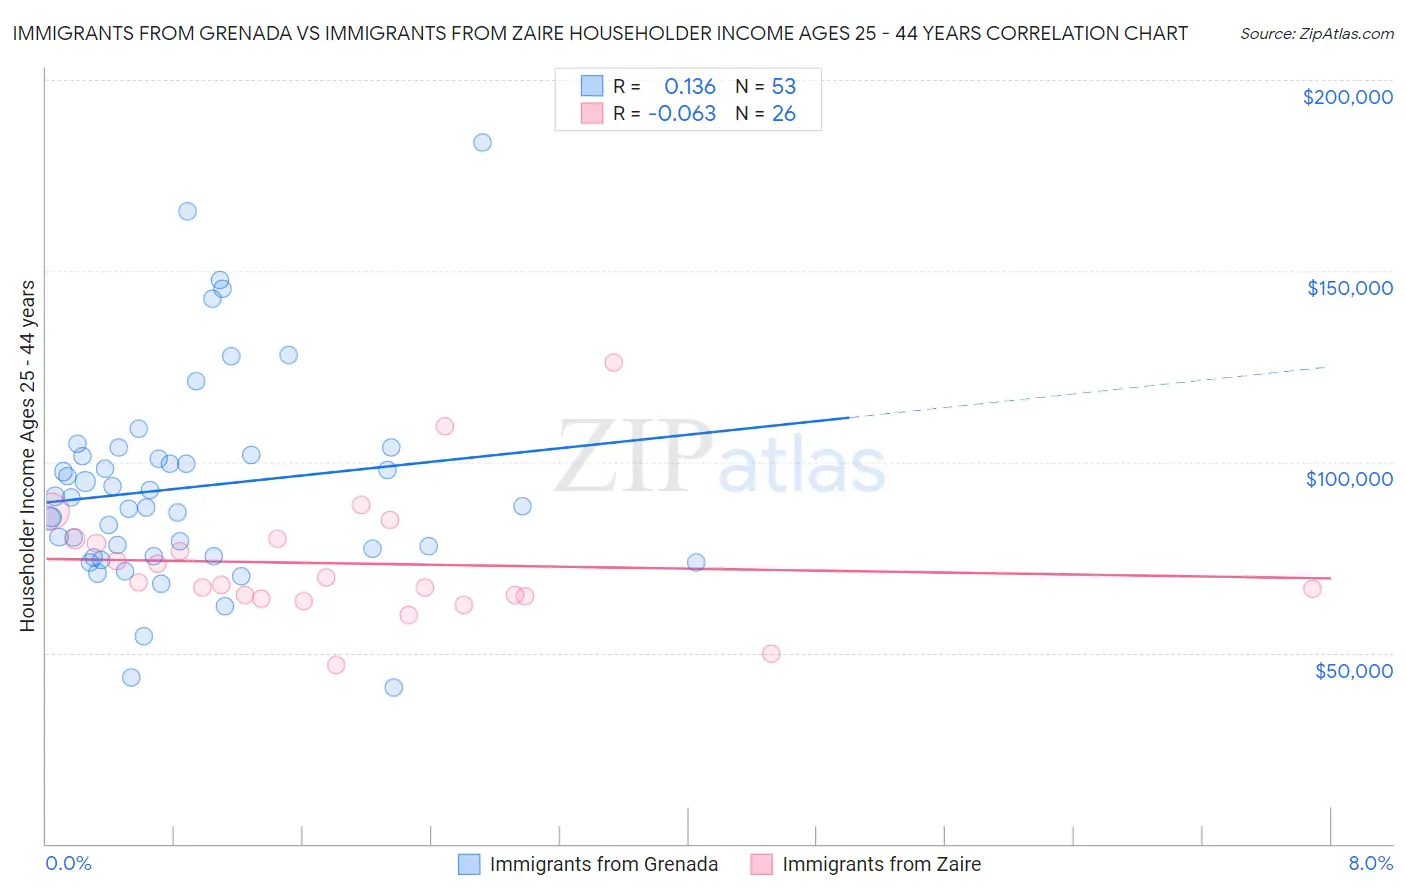 Immigrants from Grenada vs Immigrants from Zaire Householder Income Ages 25 - 44 years